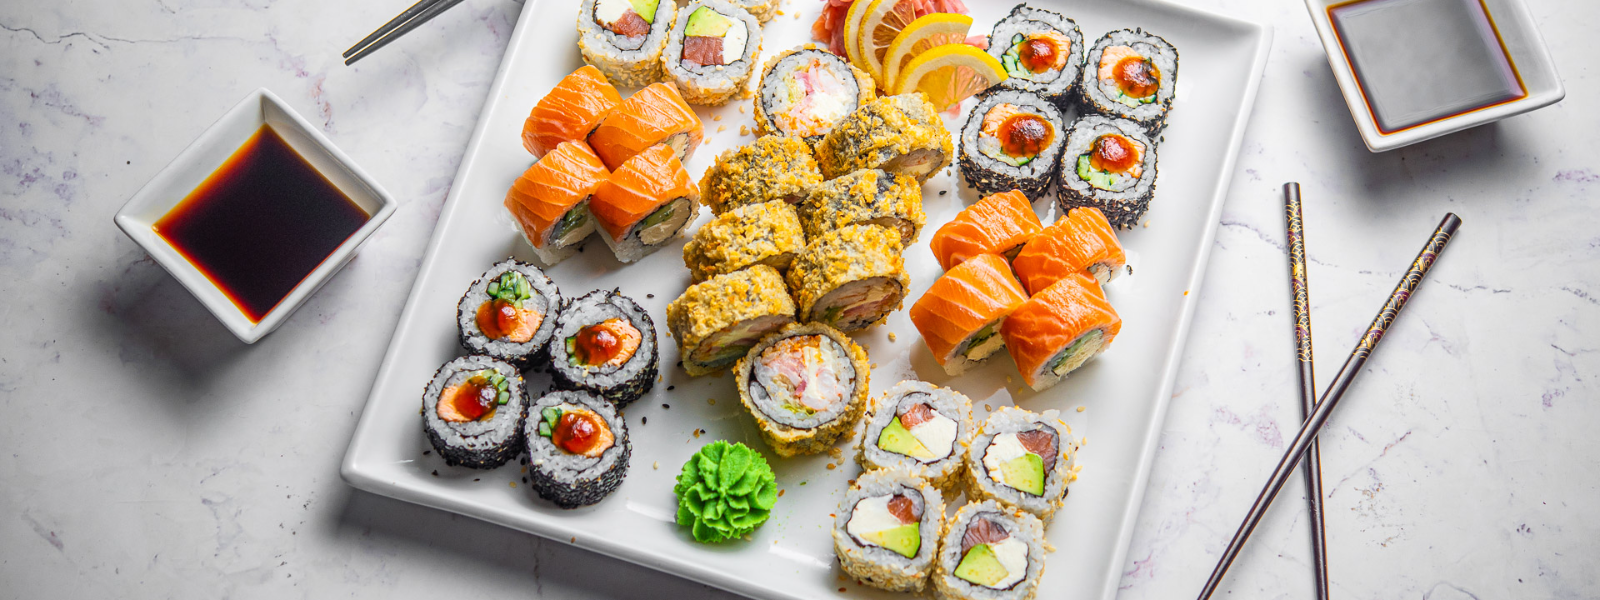 VALEKS OÜ - We offer a diverse menu of sushi sets, maki, and other Japanese delicacies, crafted with the freshest ingredi...